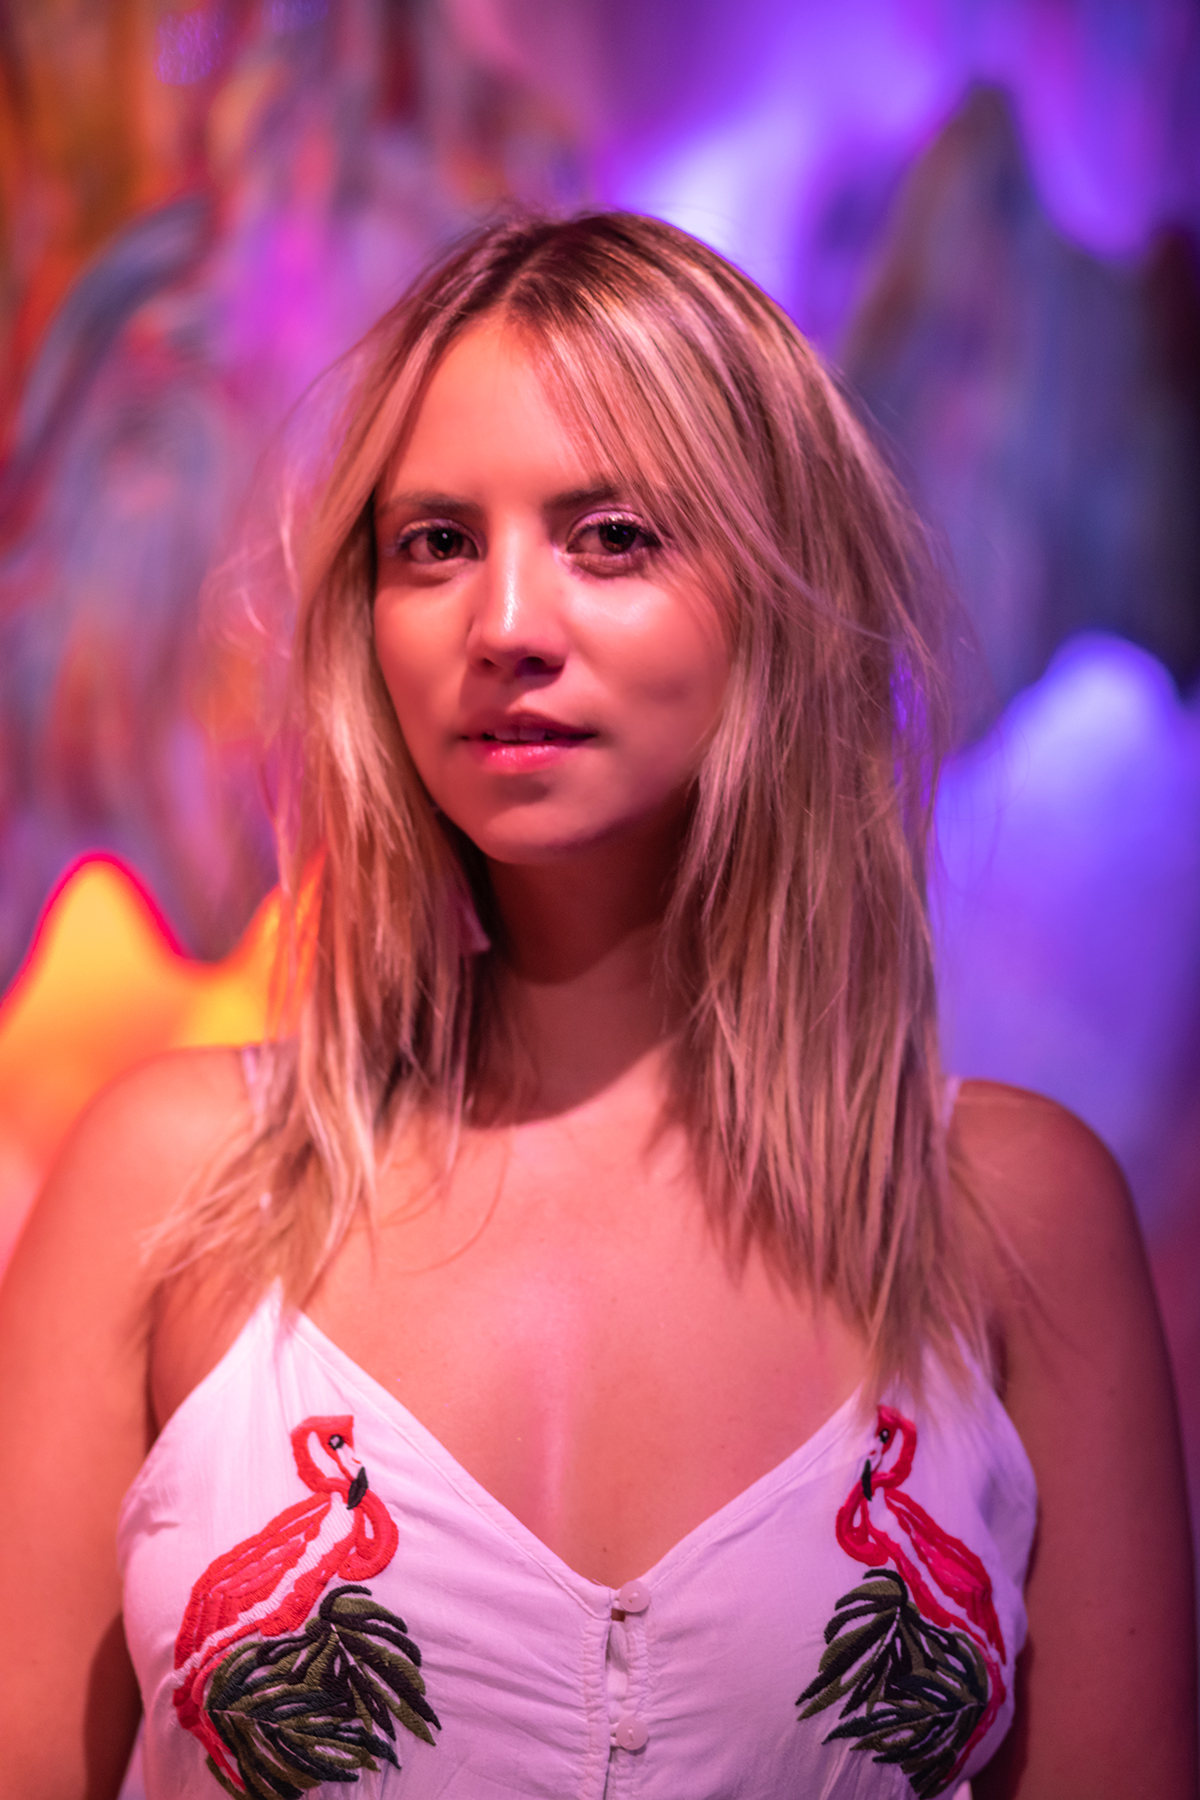 Image of artist Cami Galofre wearing a white top with two flamingos embroidered onto the shirt.  The background is out of focus, purple and orange. 